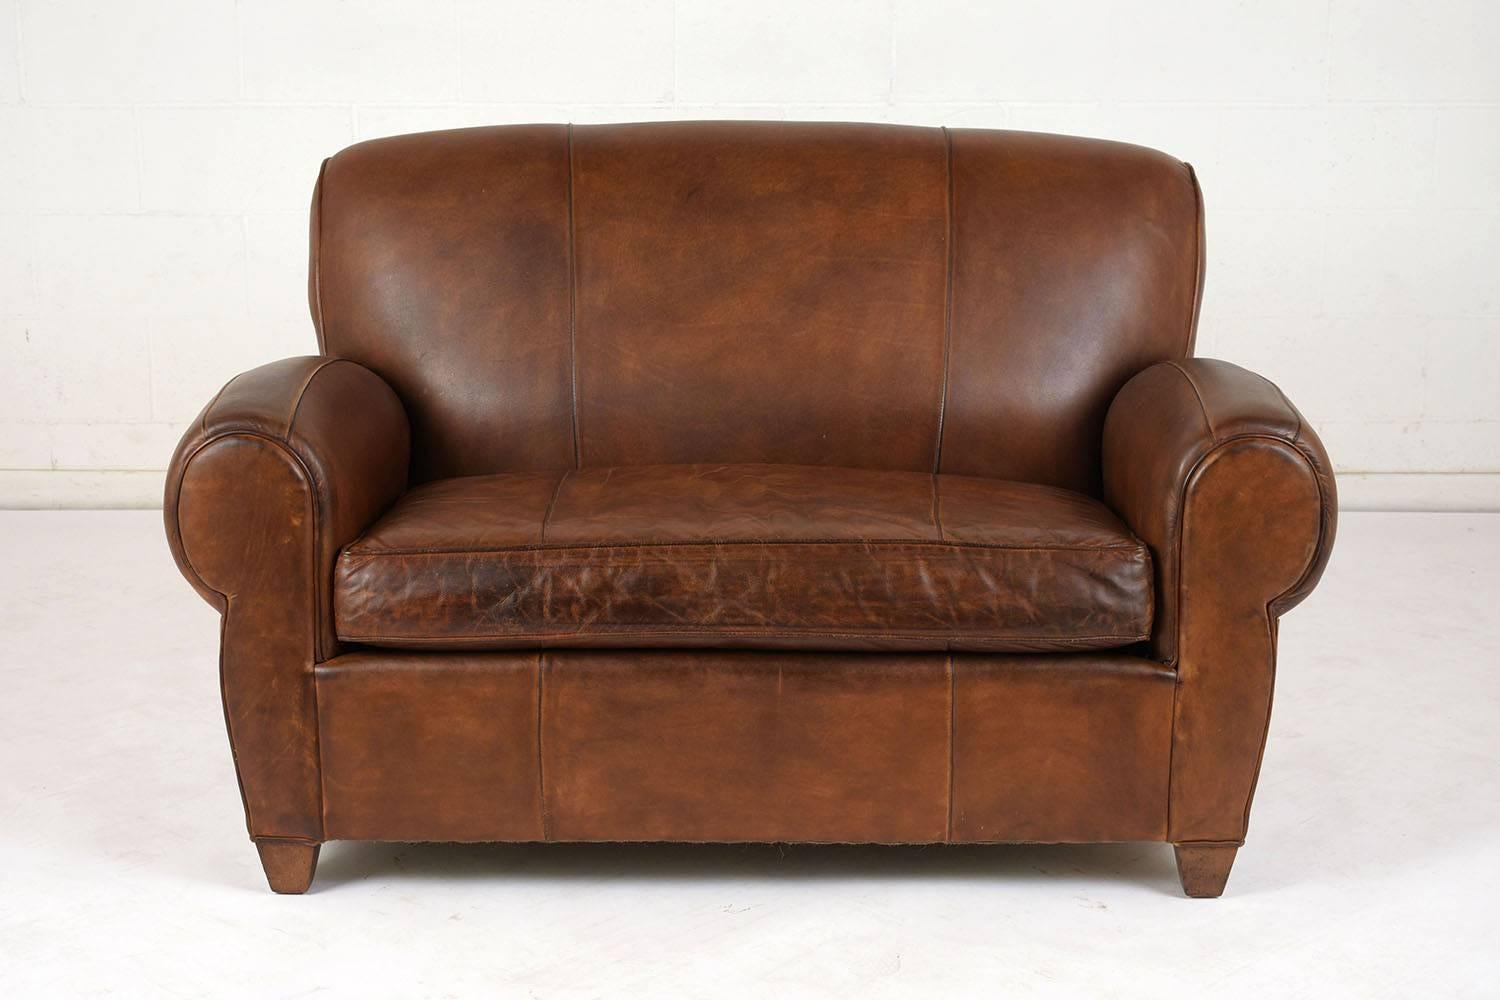 This 1970s French Art Deco-style loveseat is upholstered in a brown color leather with a naturally distressed finish and single piping trim details throughout. The very comfortable 5 inch thick cushion extends the entire length of the loveseat. The